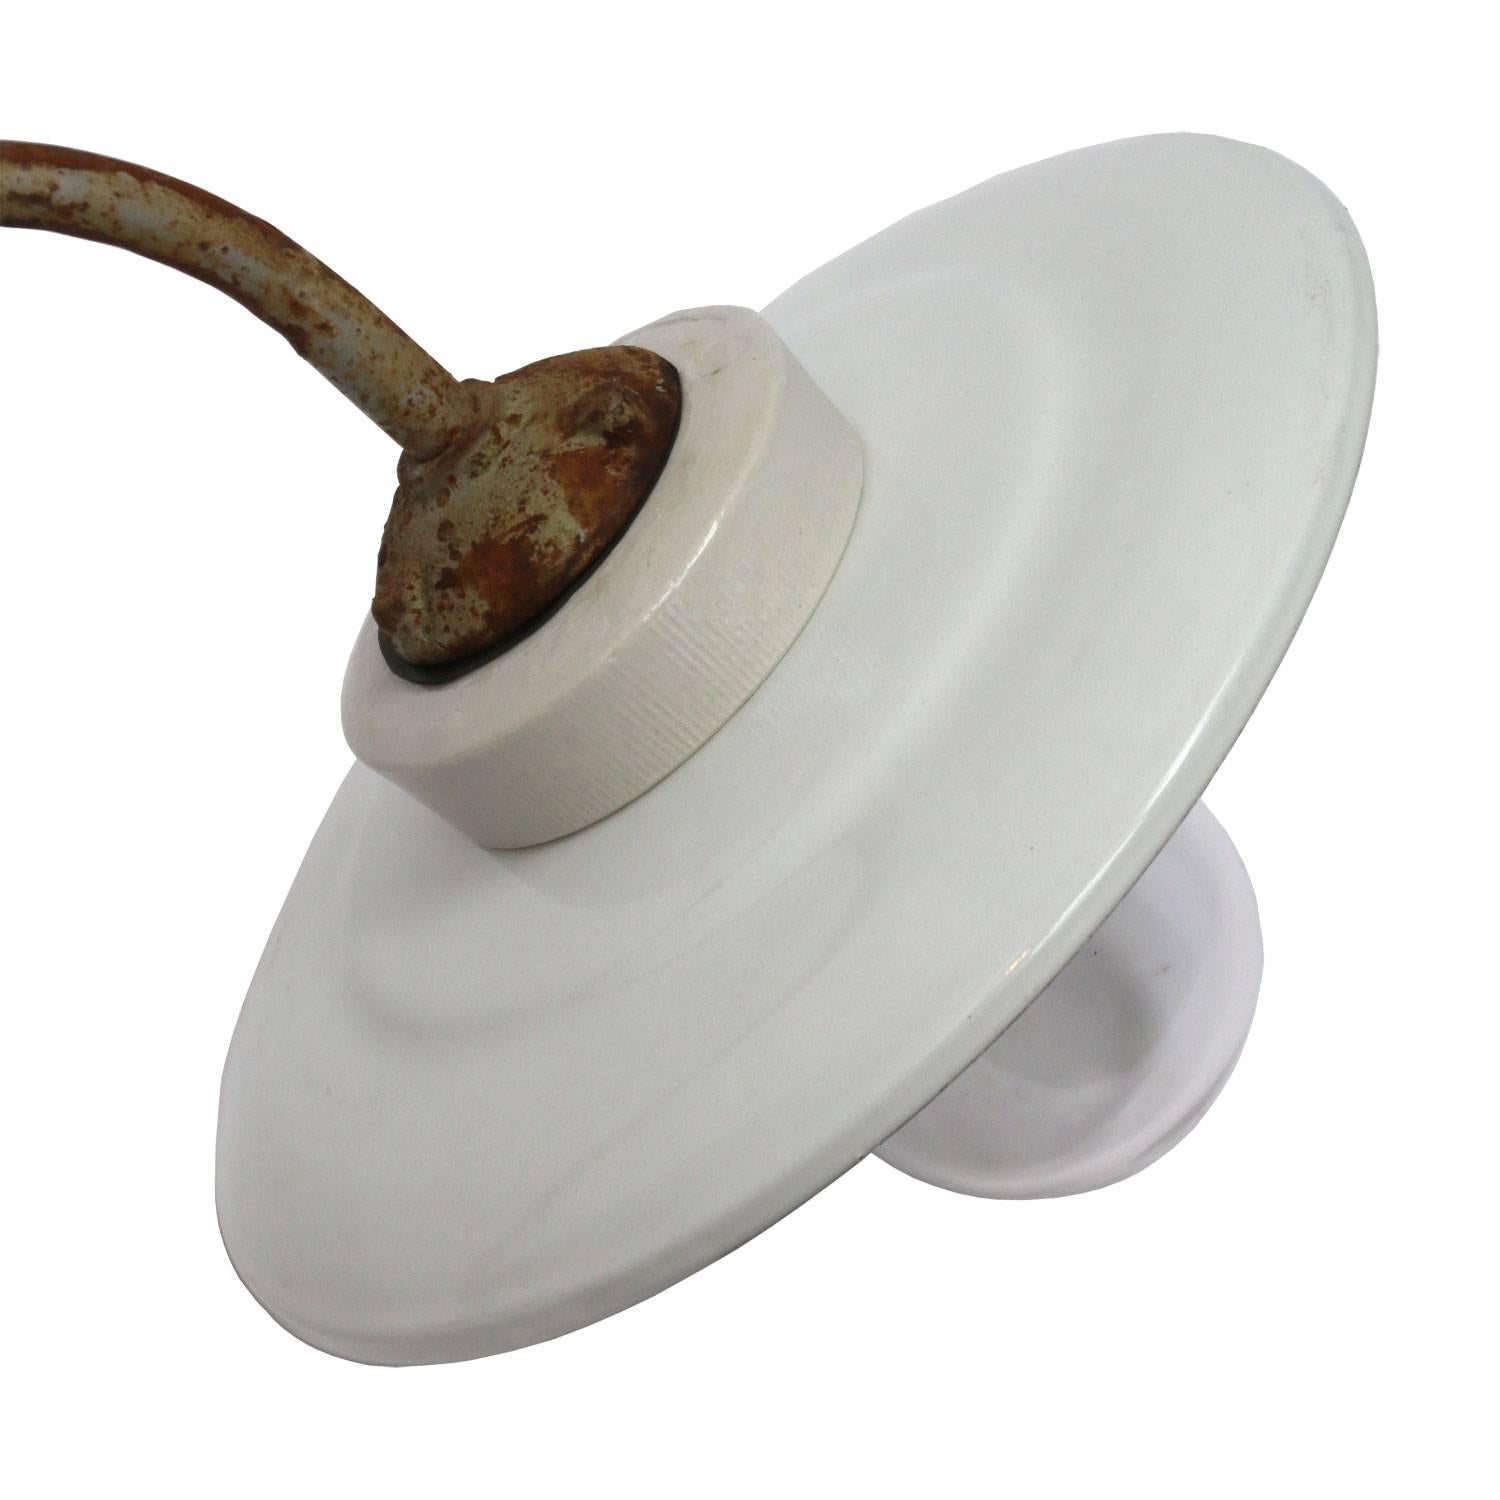 White enamel industrial wall light with white interior.
Cast iron and porcelain top, clear glass.
Diameter cast iron wall mount: 9 cm, 3 holes to secure.

Weight: 2.10 kg / 4.6 lb

Priced per individual item. All lamps have been made suitable by